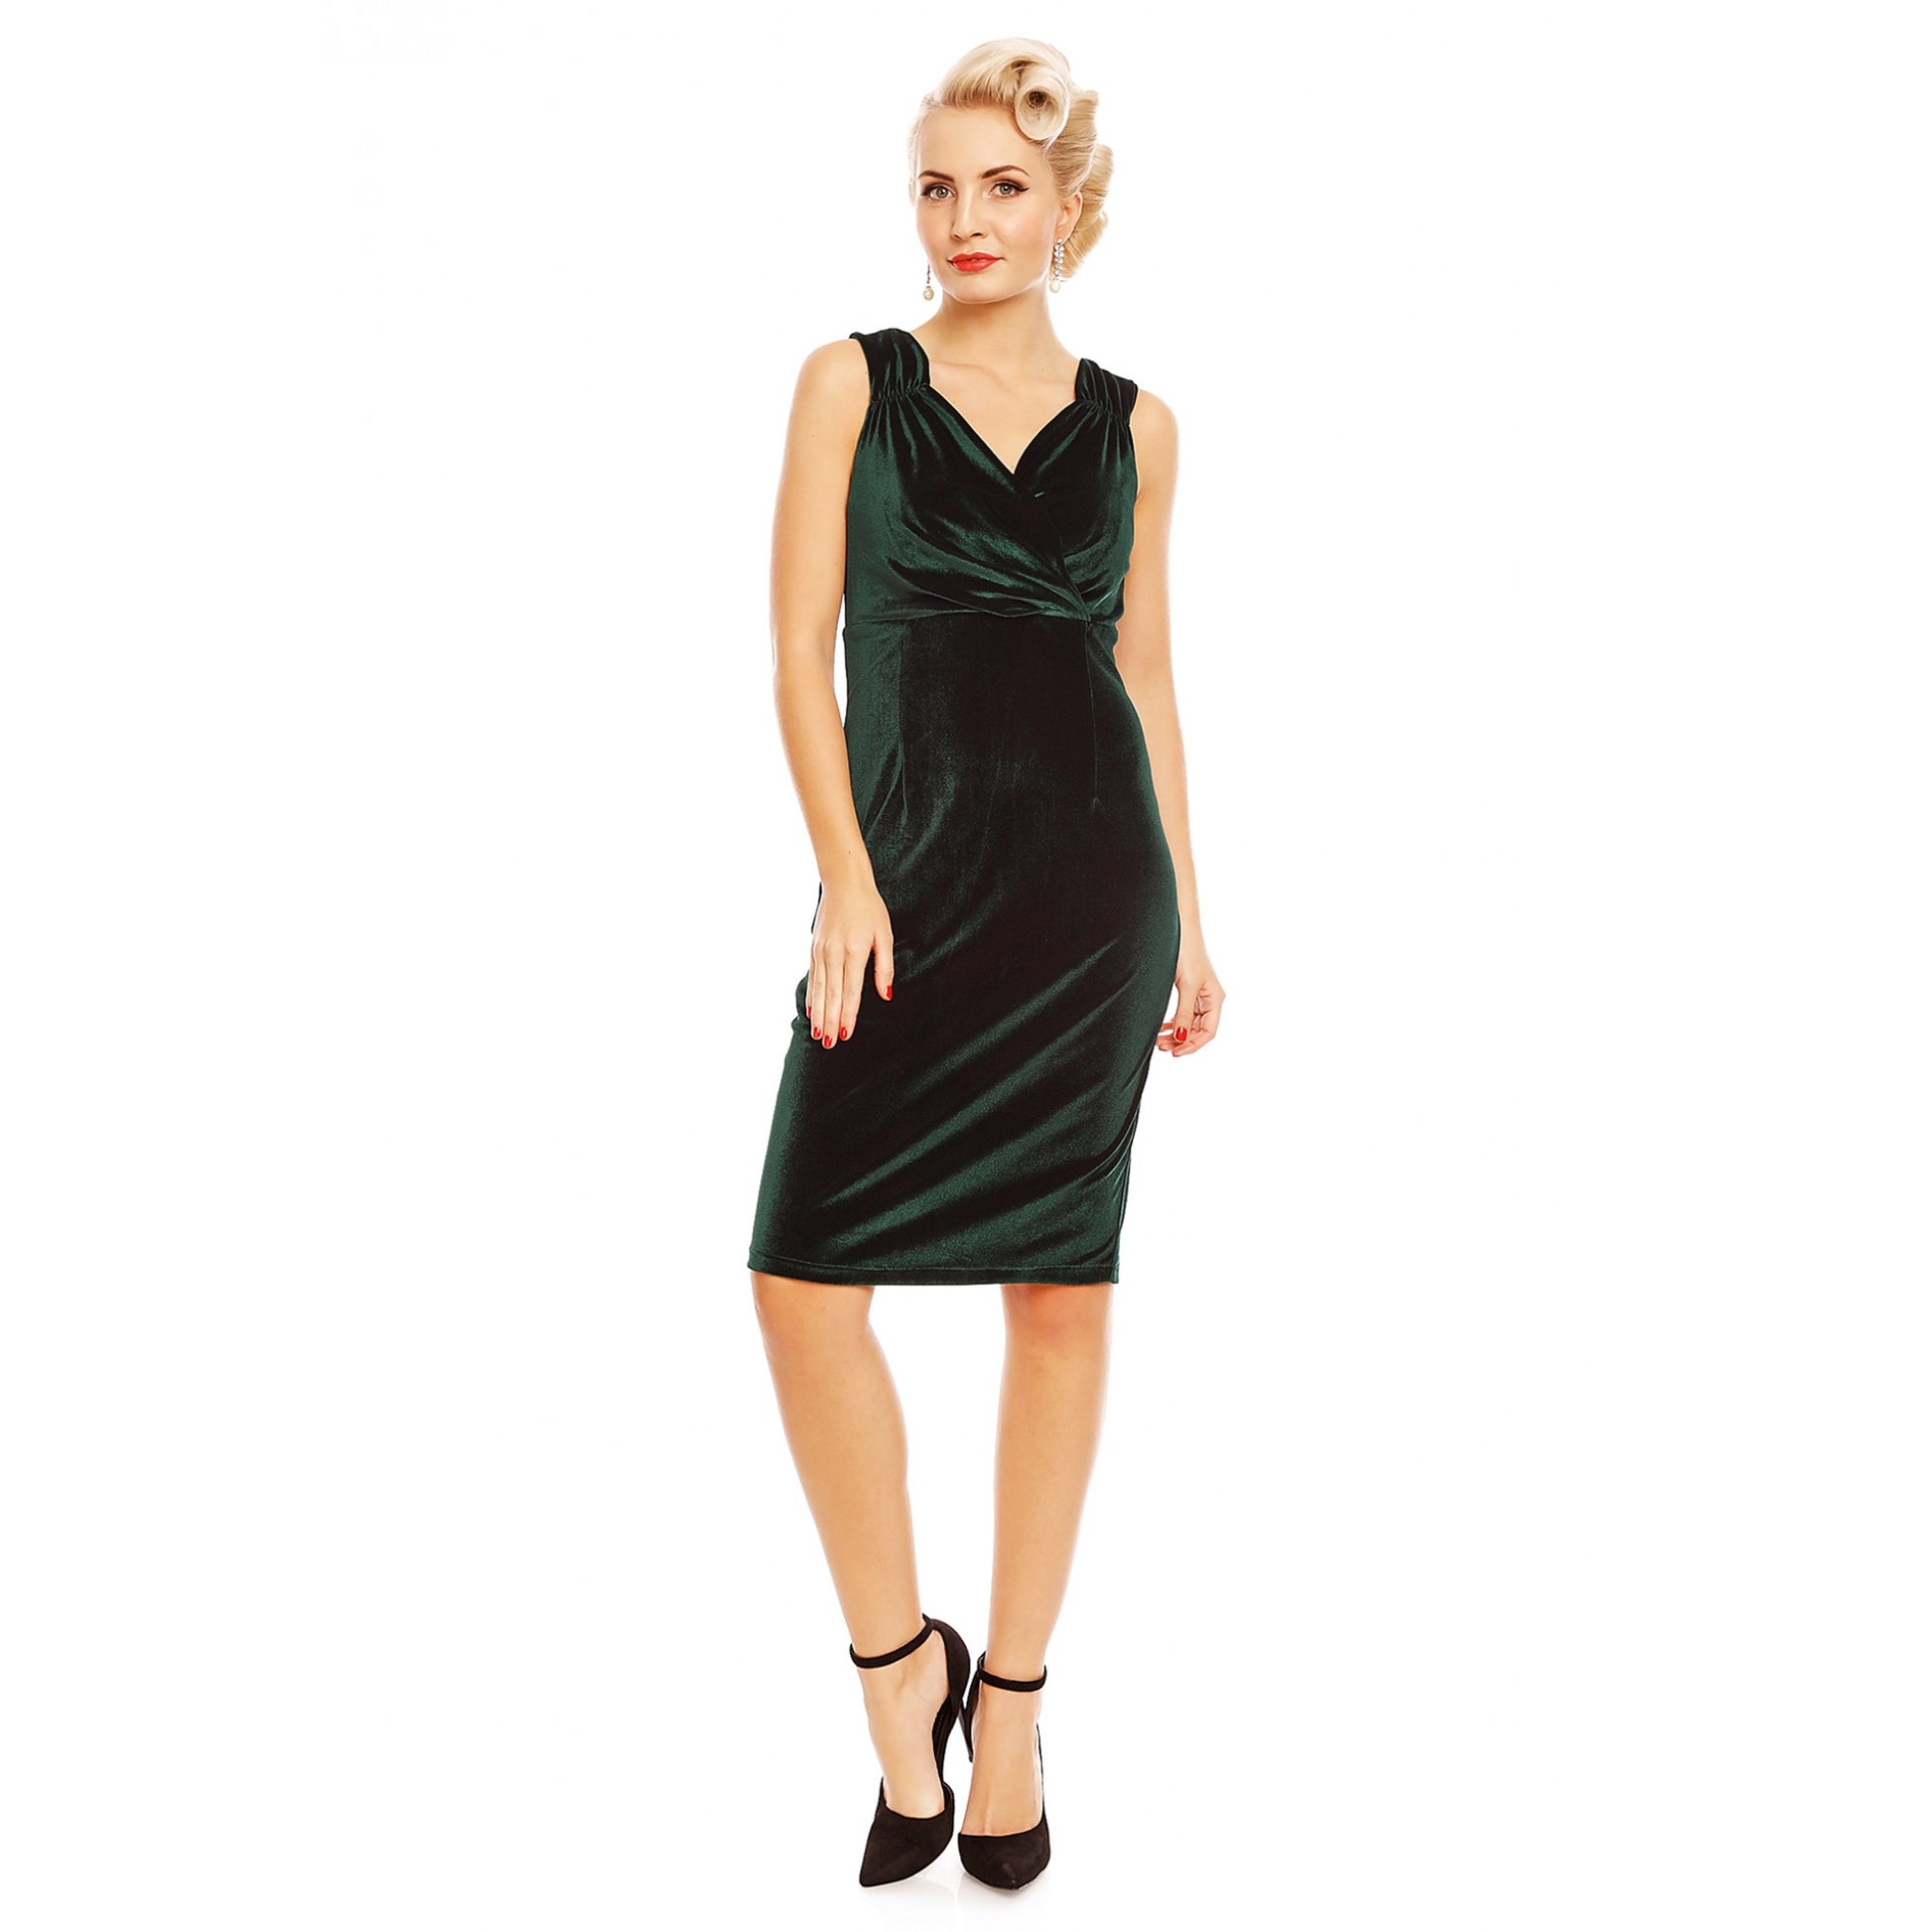 Sultry model with vintage styled makeup and short blonde victory rolls and curled hair stood wearing a classy sleeveless green velvet mid length dress and strappy black high heels